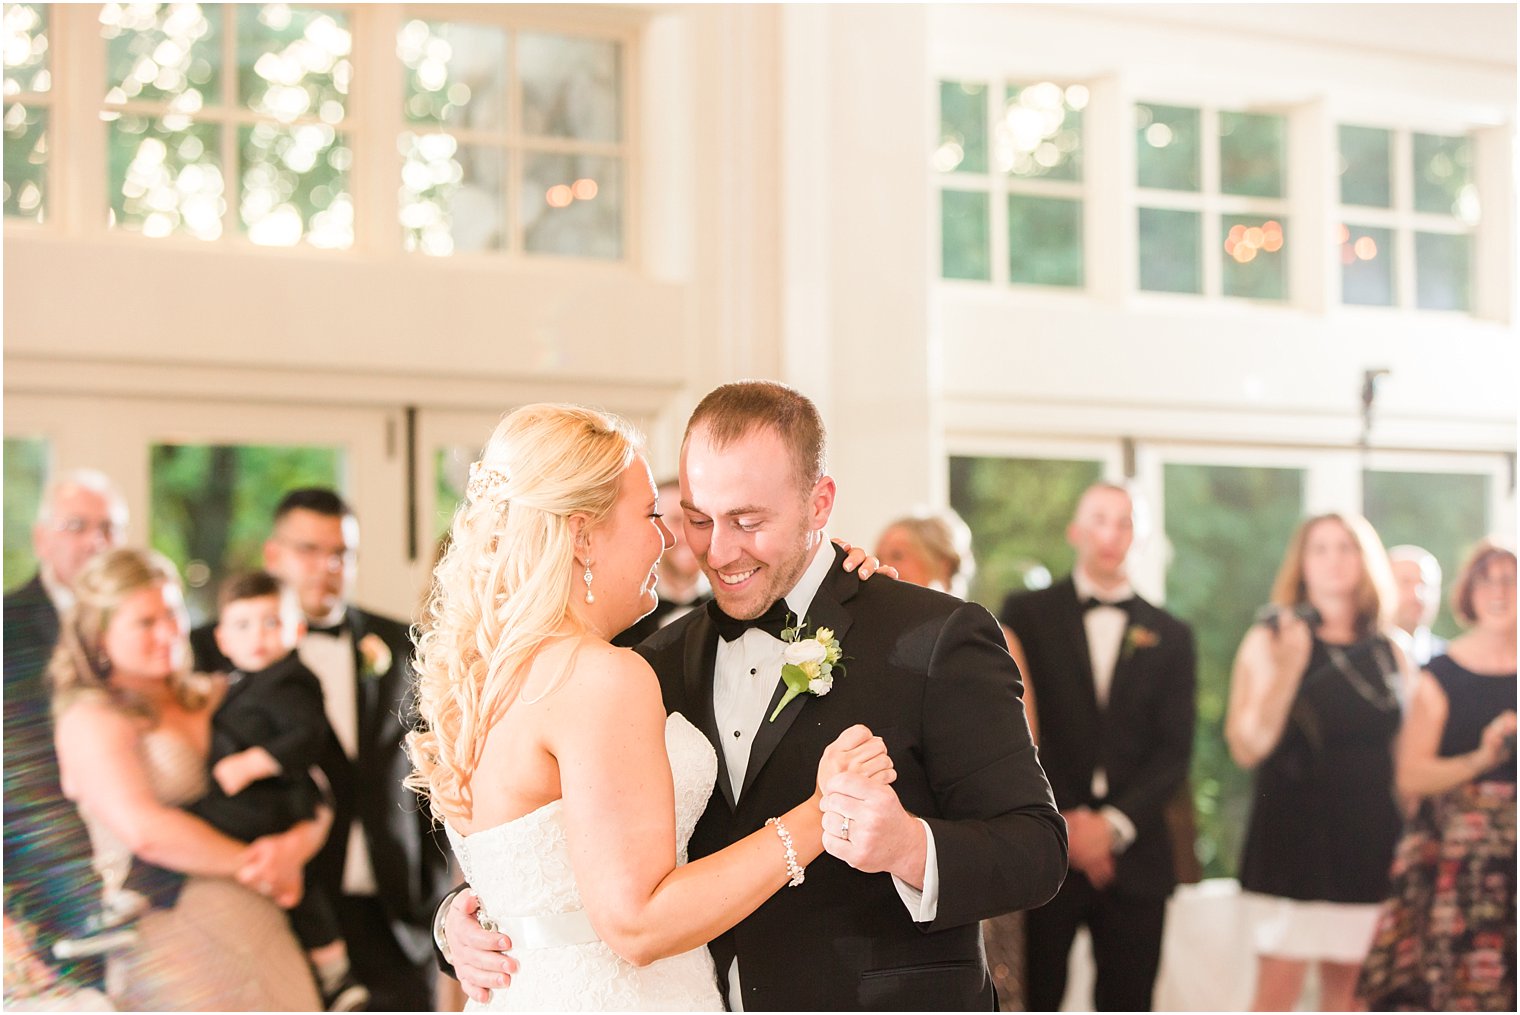 Bride and groom first dance